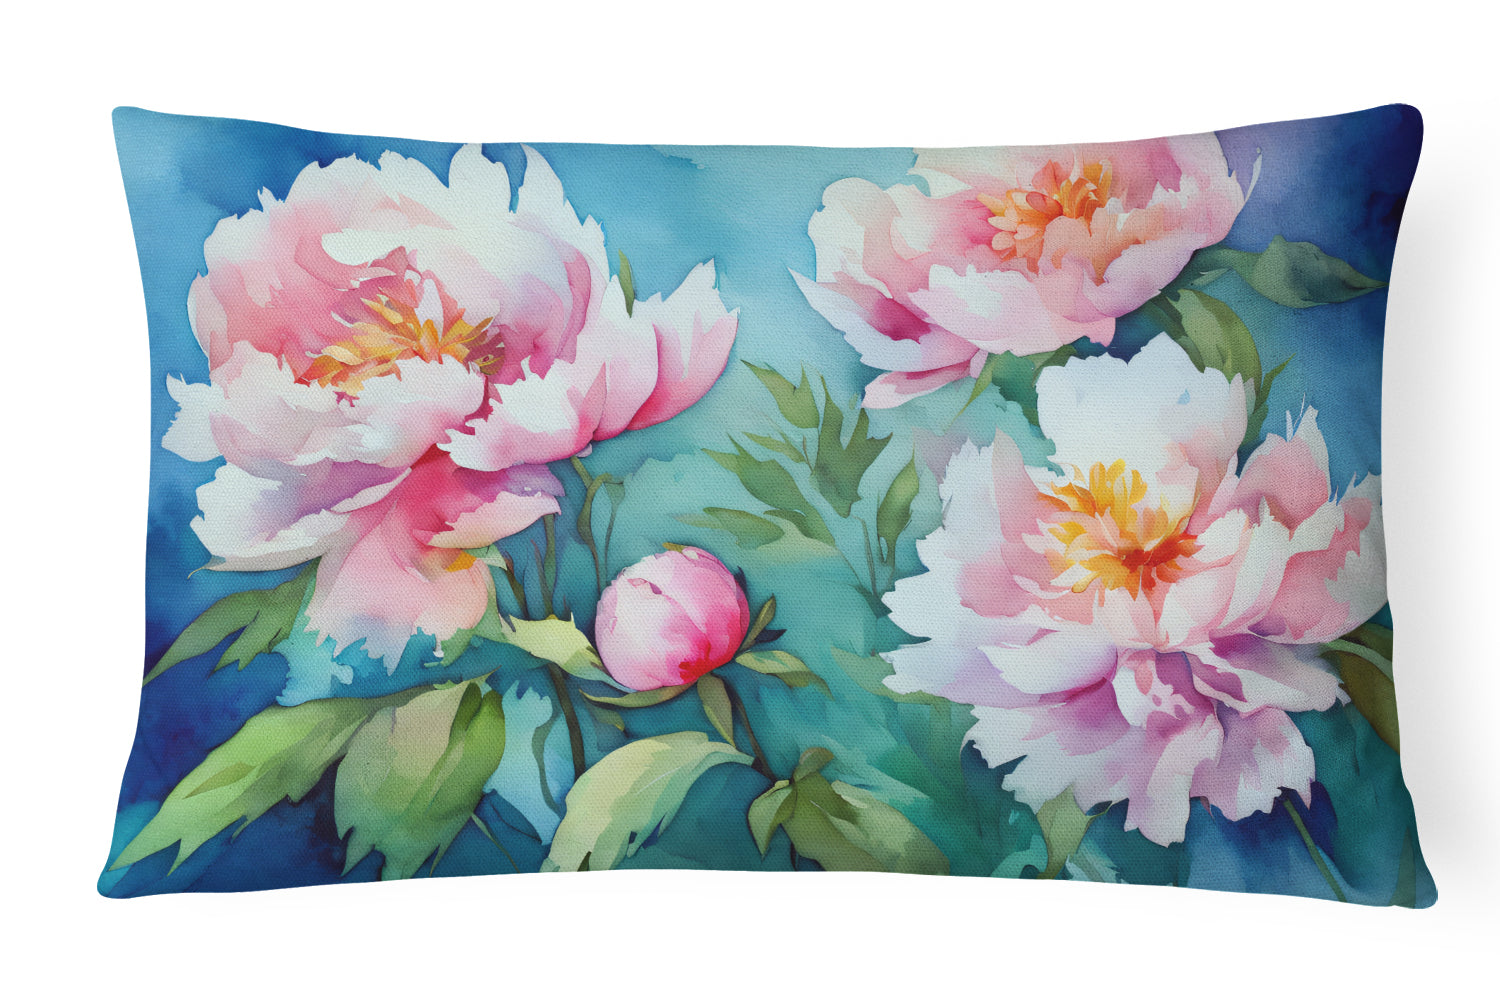 Buy this Peonies in Watercolor Fabric Decorative Pillow